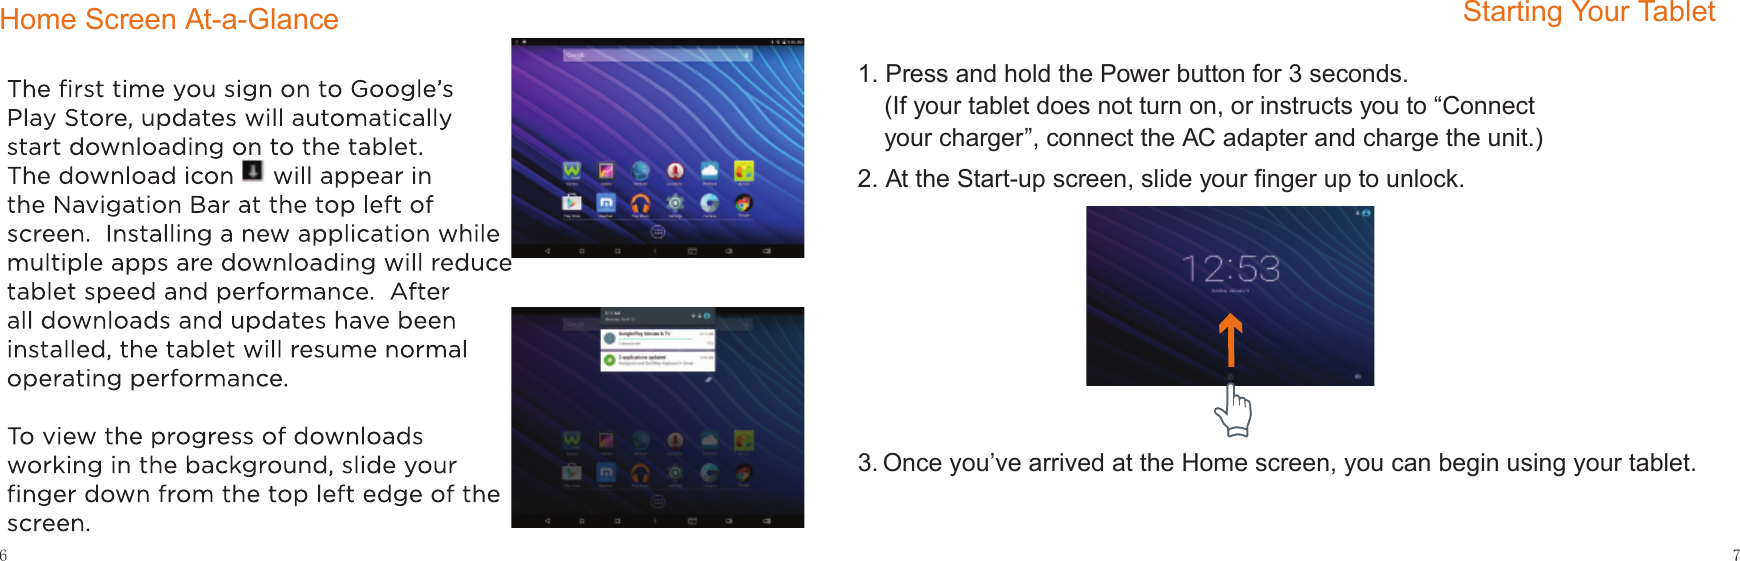 7Starting Your Tablet6Home Screen At-a-Glance1. Press and hold the Power button for 3 seconds. (If your tablet does not turn on, or instructs you to “Connect your charger”, connect the AC adapter and charge the unit.)2. At the Start-up screen, slide your ﬁnger up to unlock.3. Once you’ve arrived at the Home screen, you can begin using your tablet.